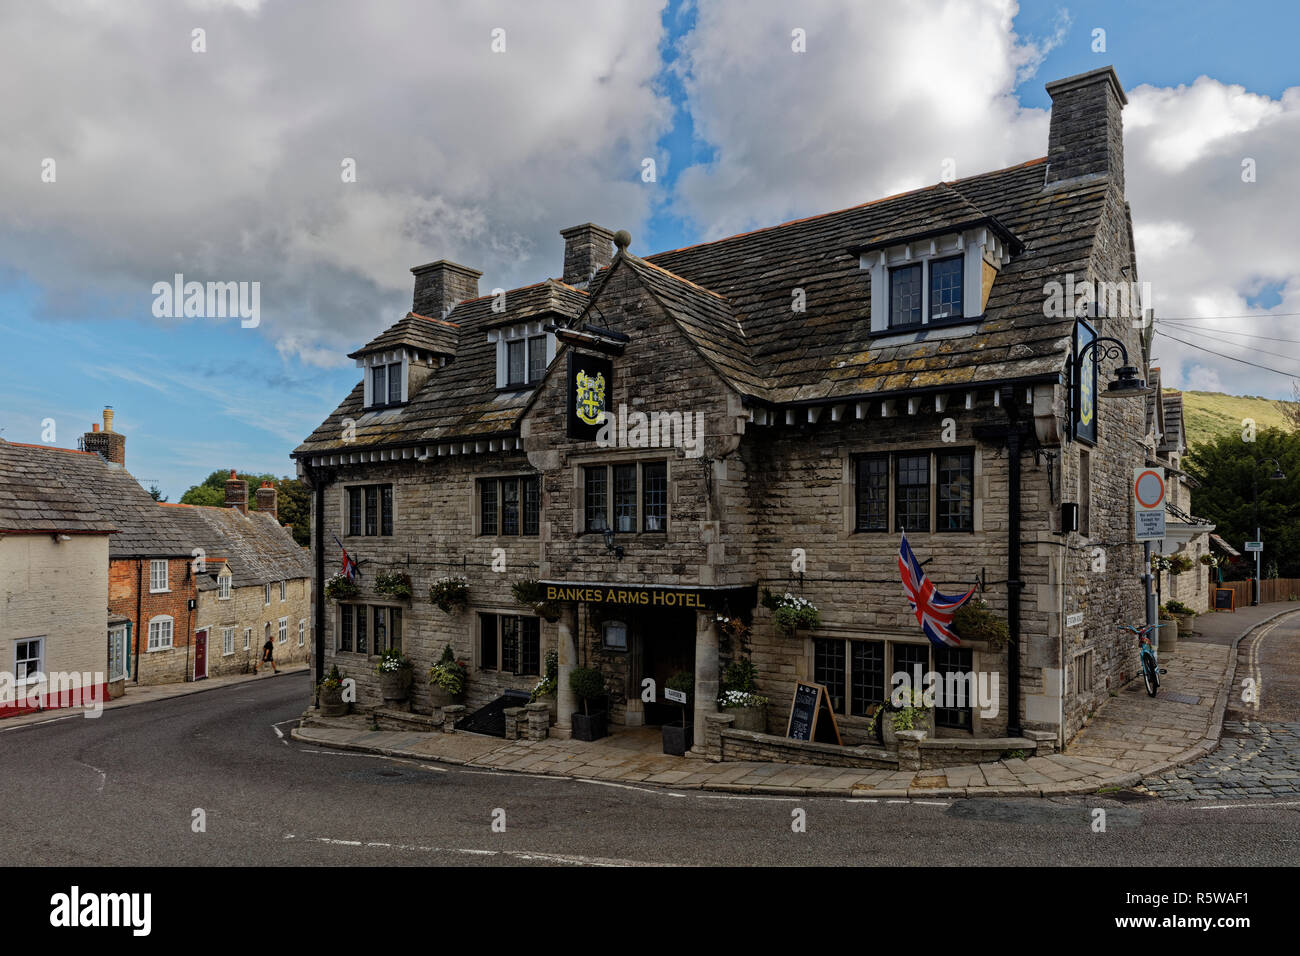 The Bankes Arms Hotel in the village of Corfe Castle, Dorset Stock Photo